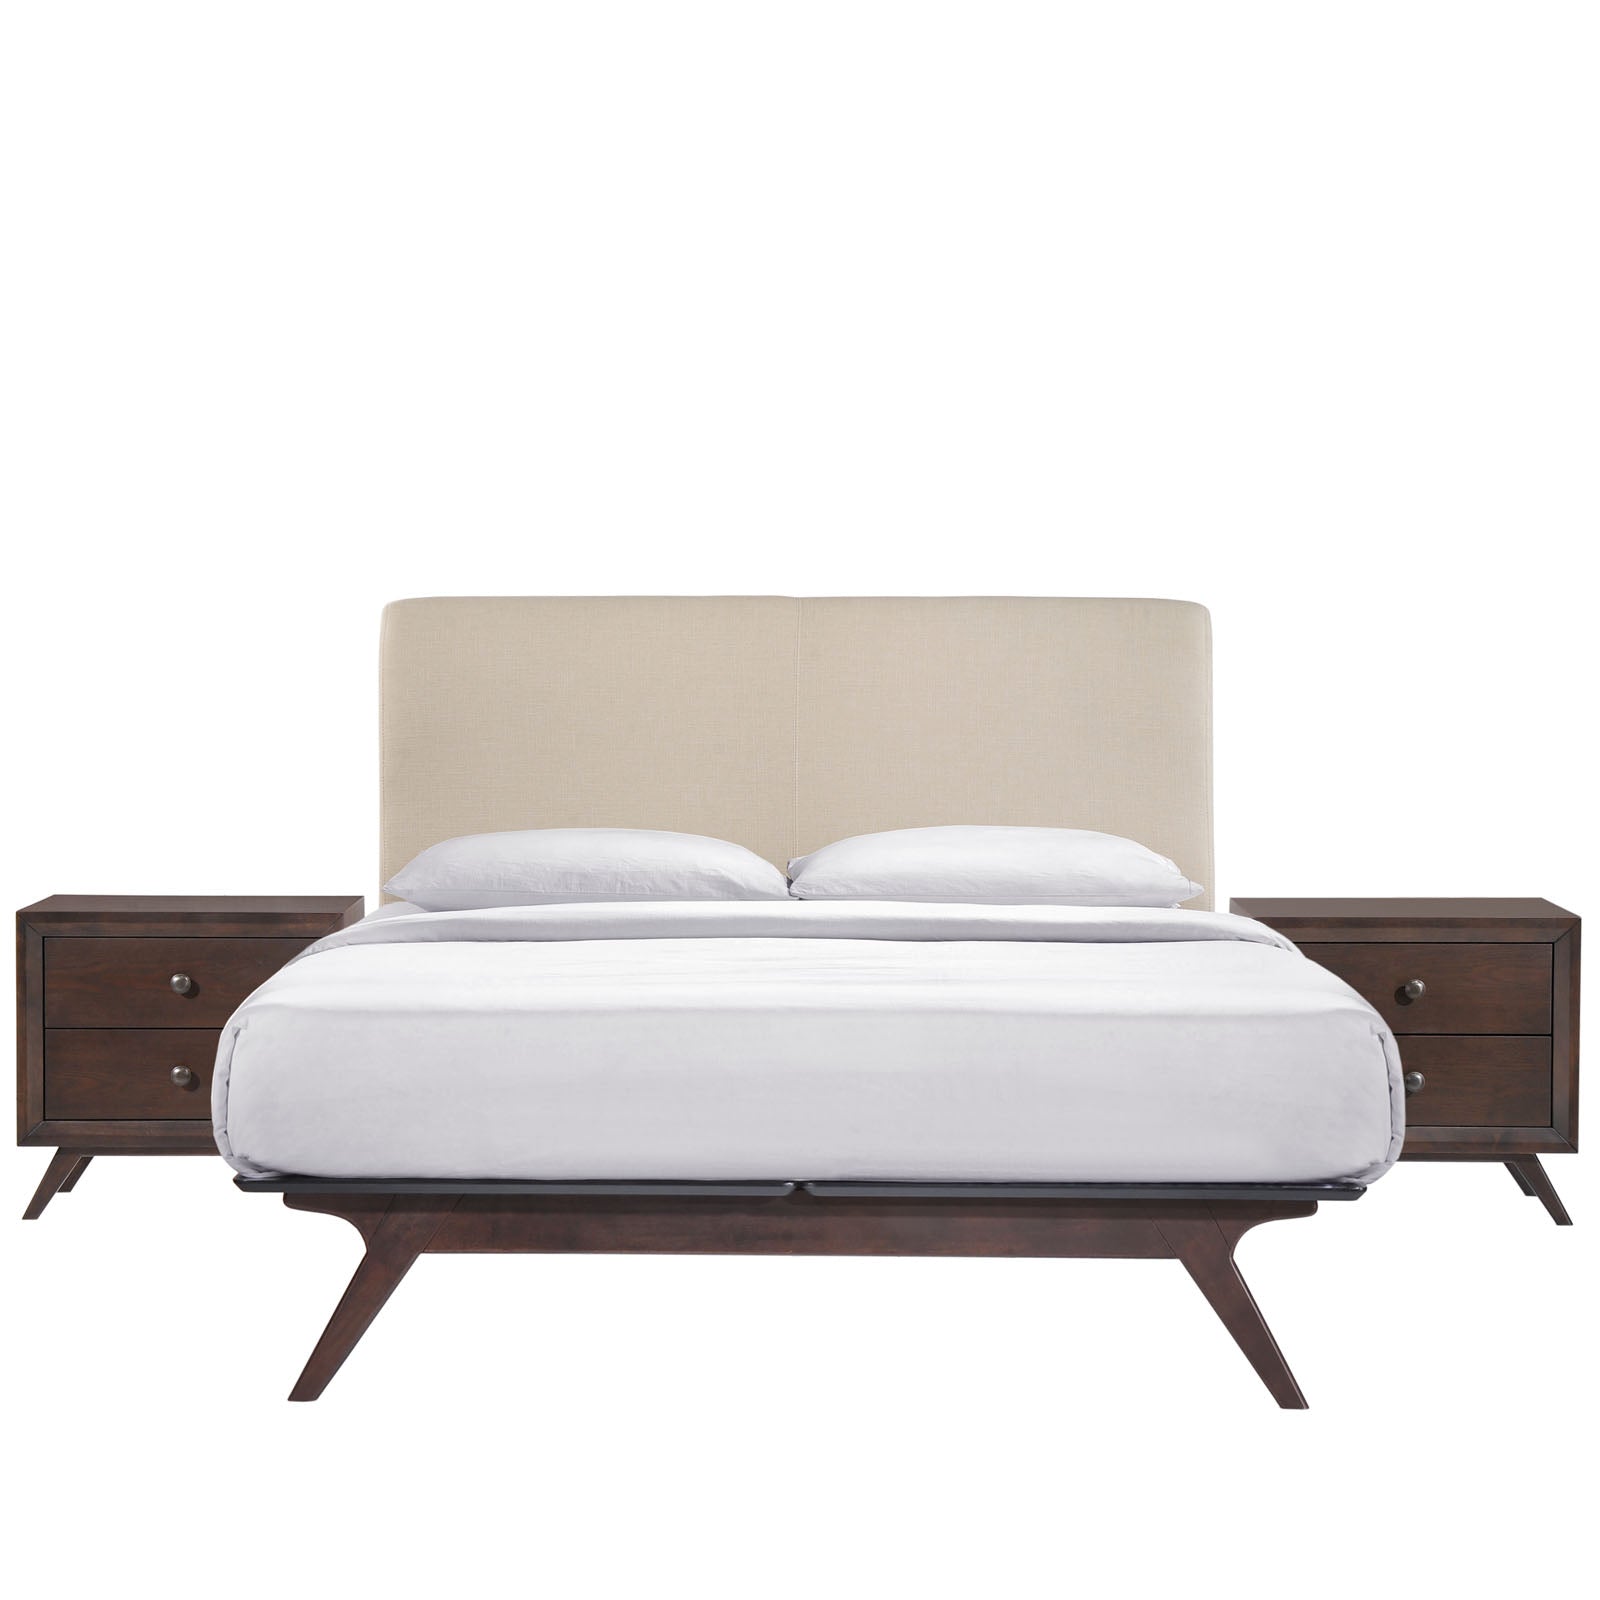 Tracy 3 Piece Queen Bedroom Set - East Shore Modern Home Furnishings